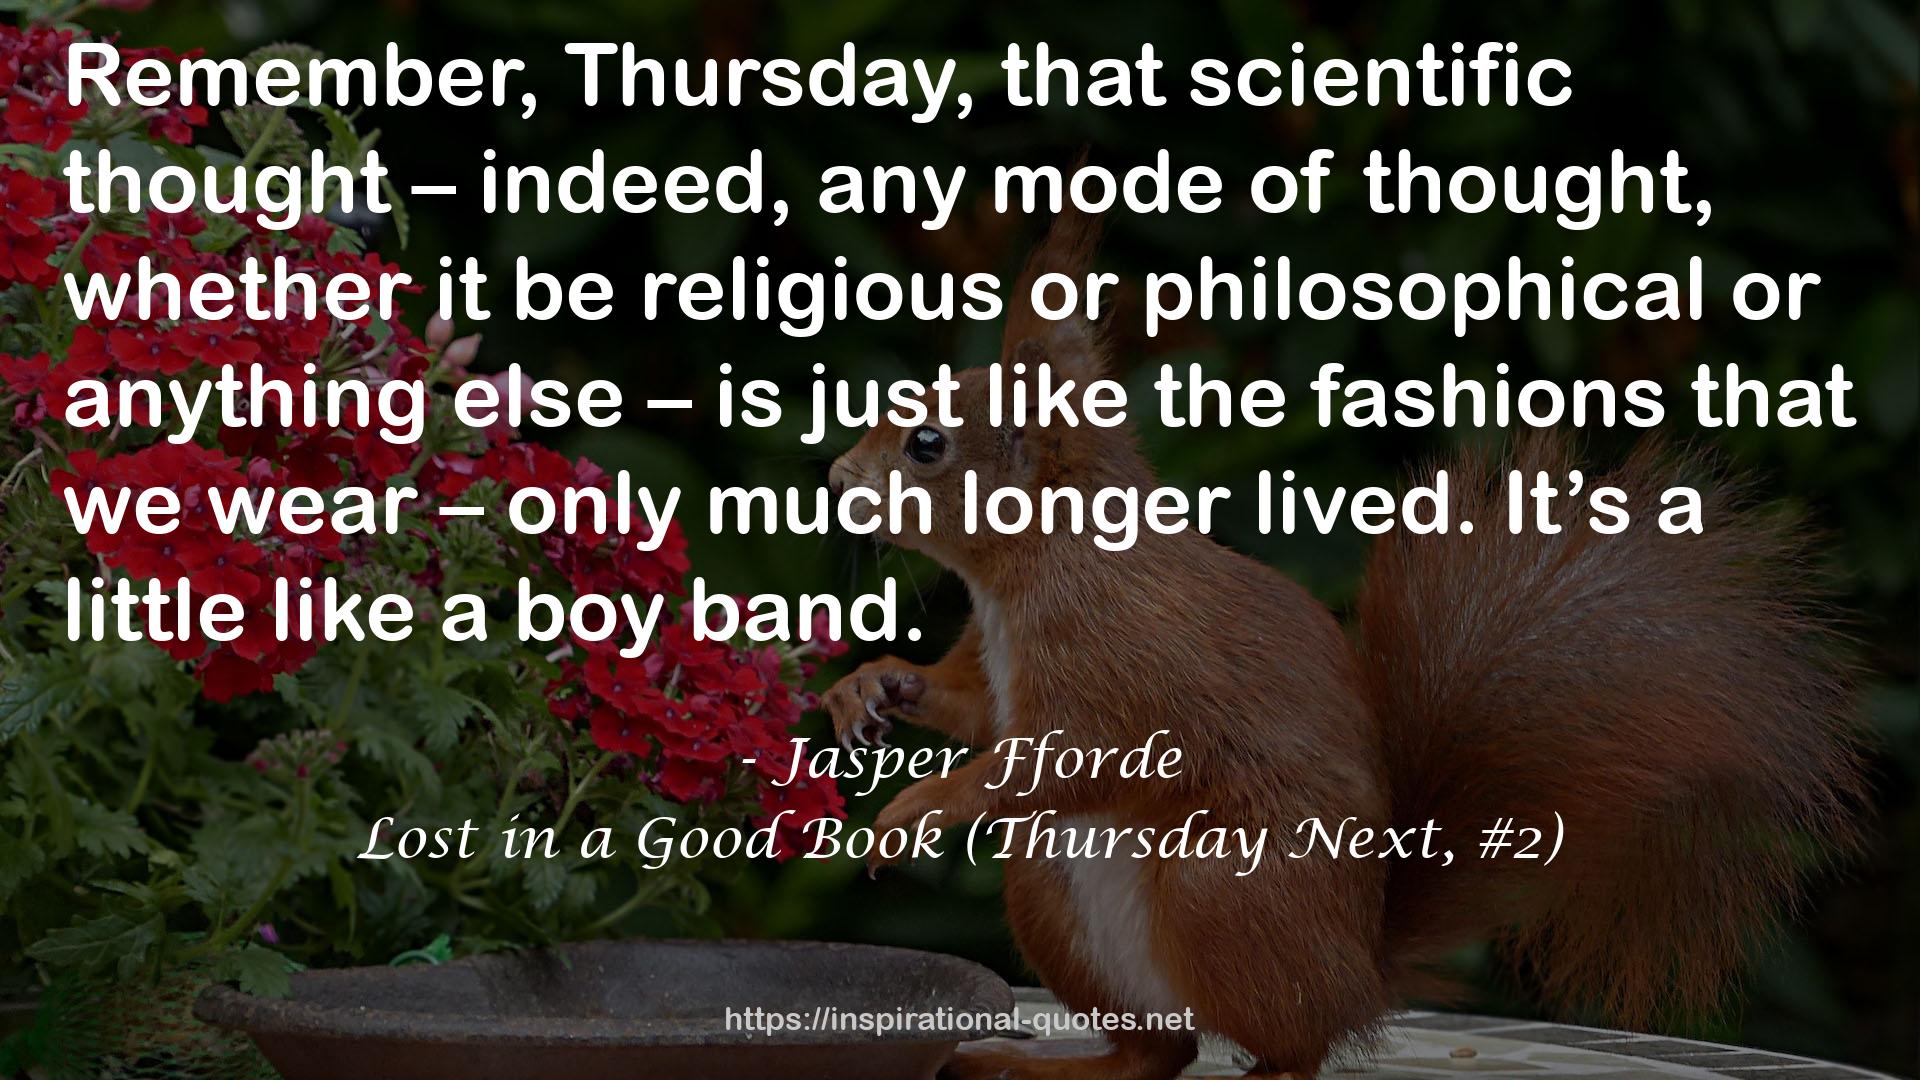 Lost in a Good Book (Thursday Next, #2) QUOTES